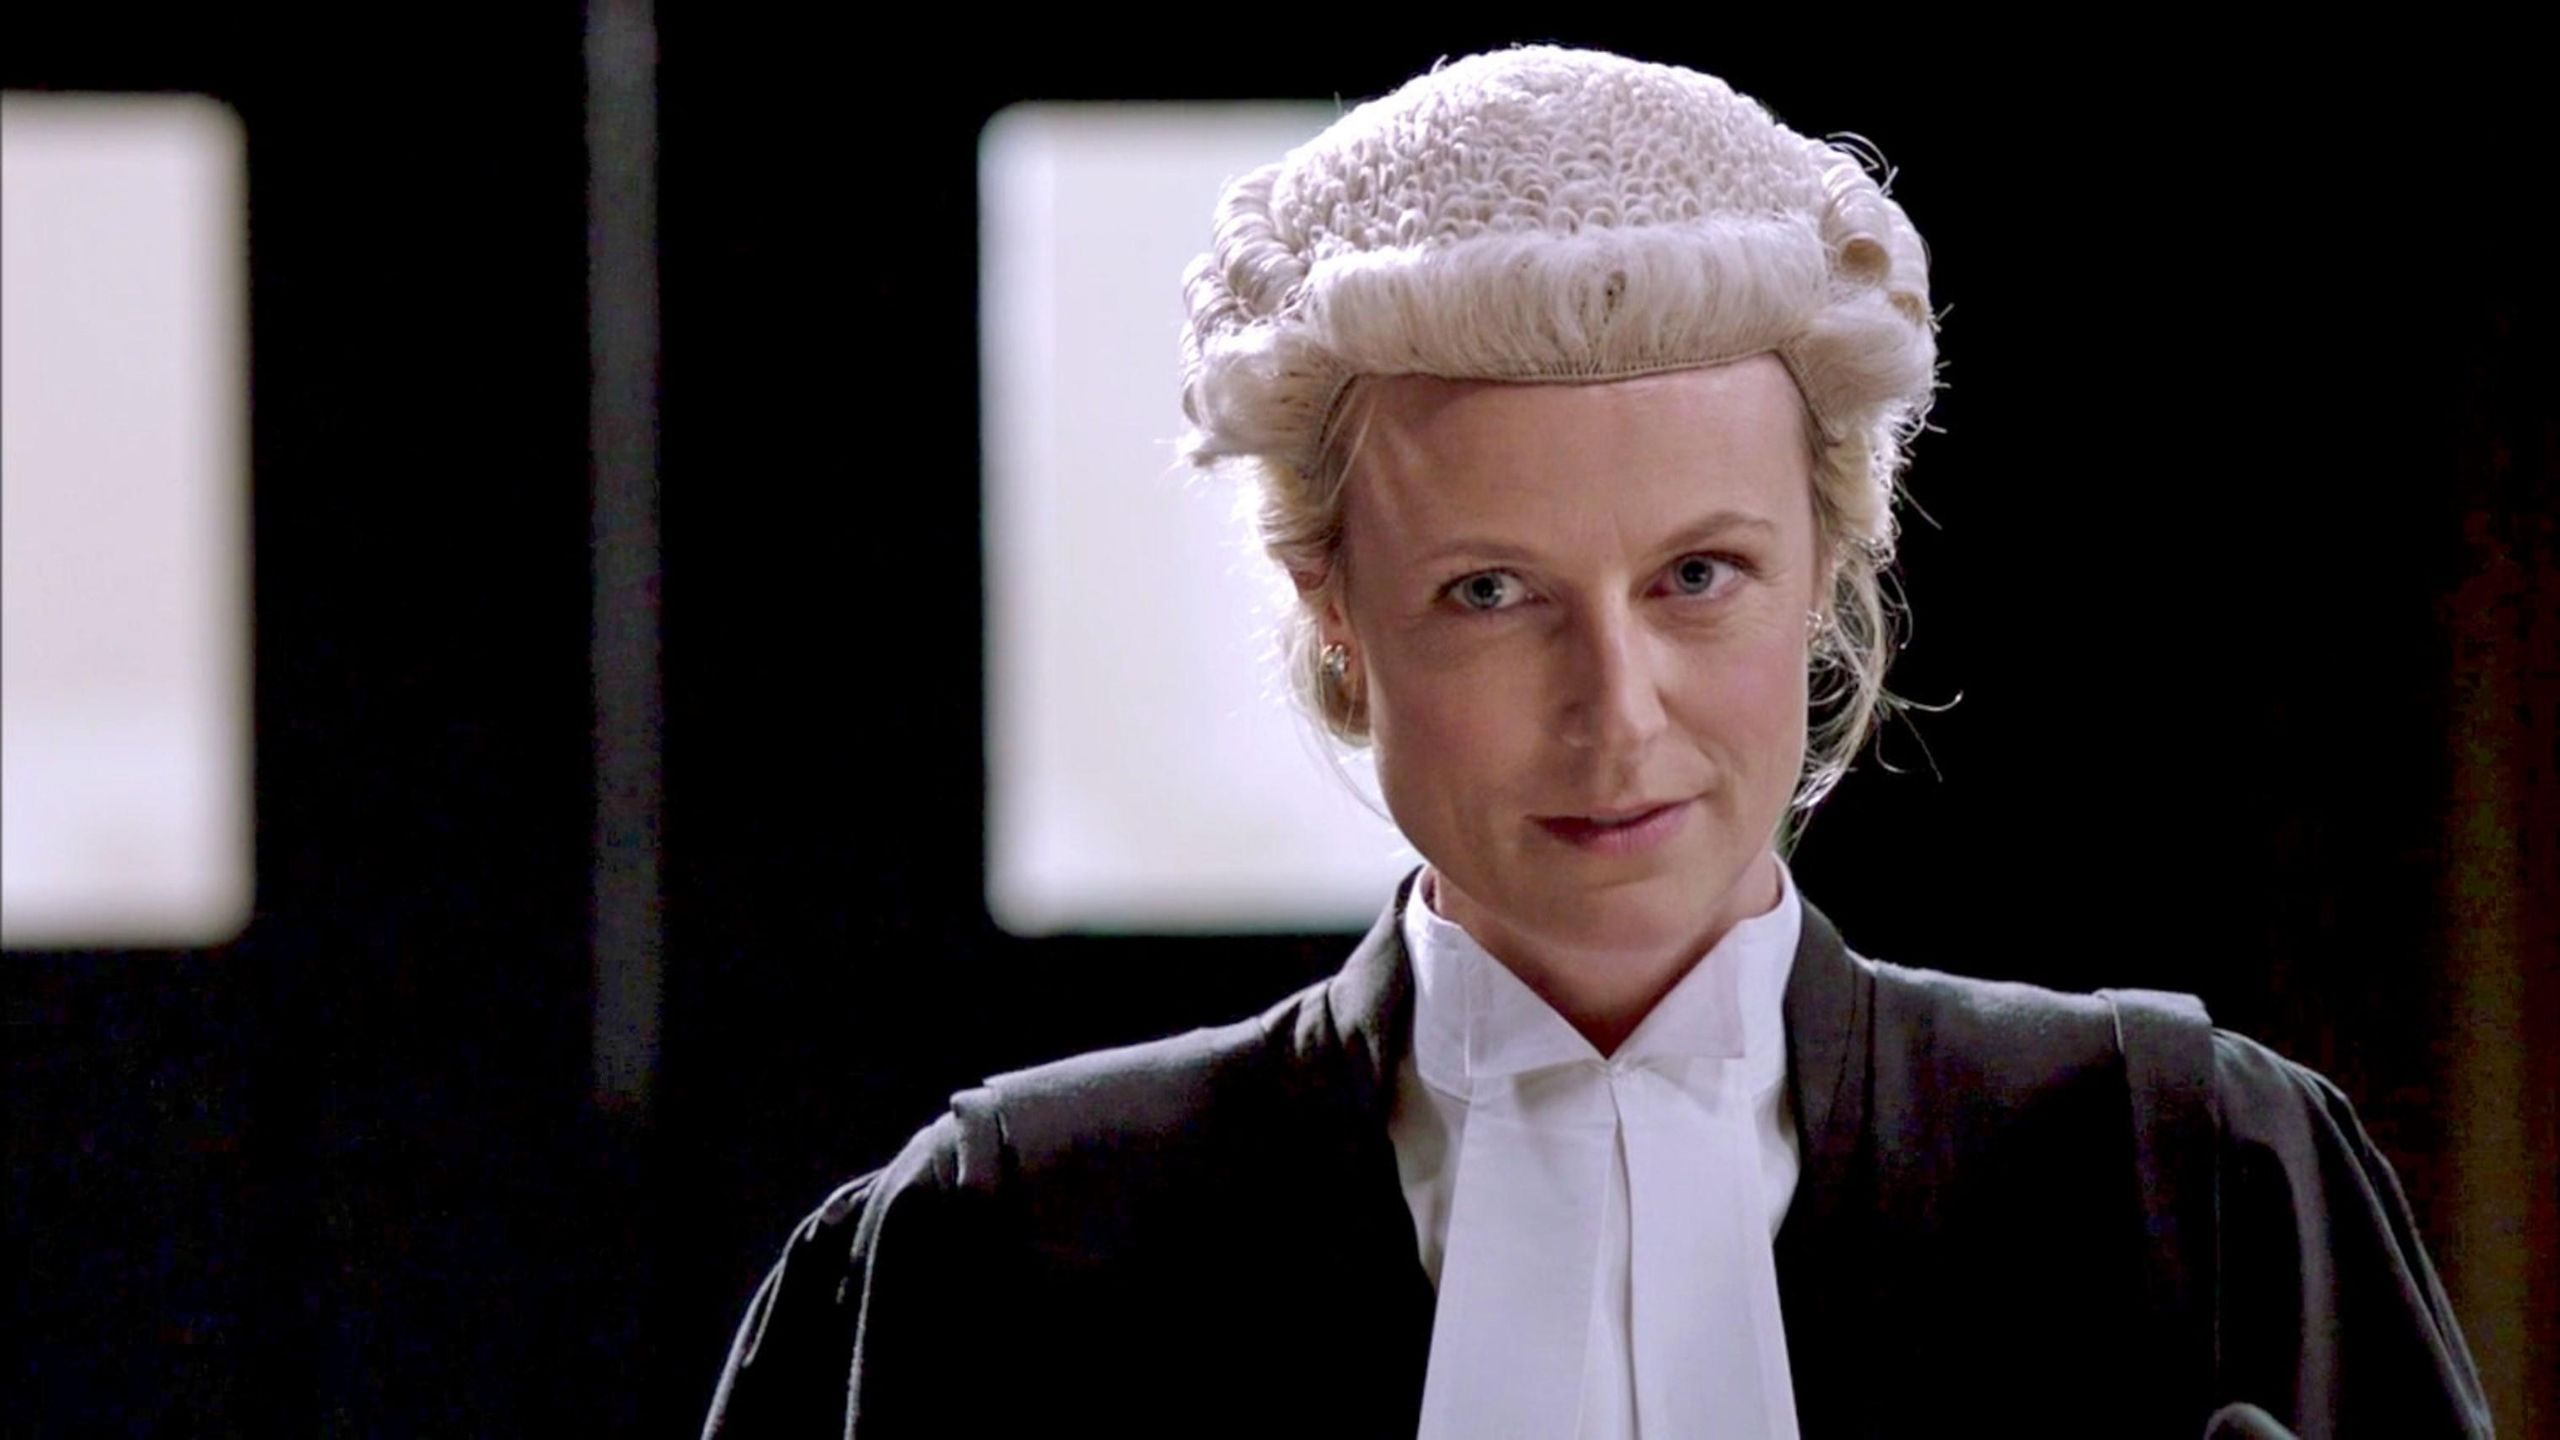 Female prosecutor in the courtroom wearing wig and gown